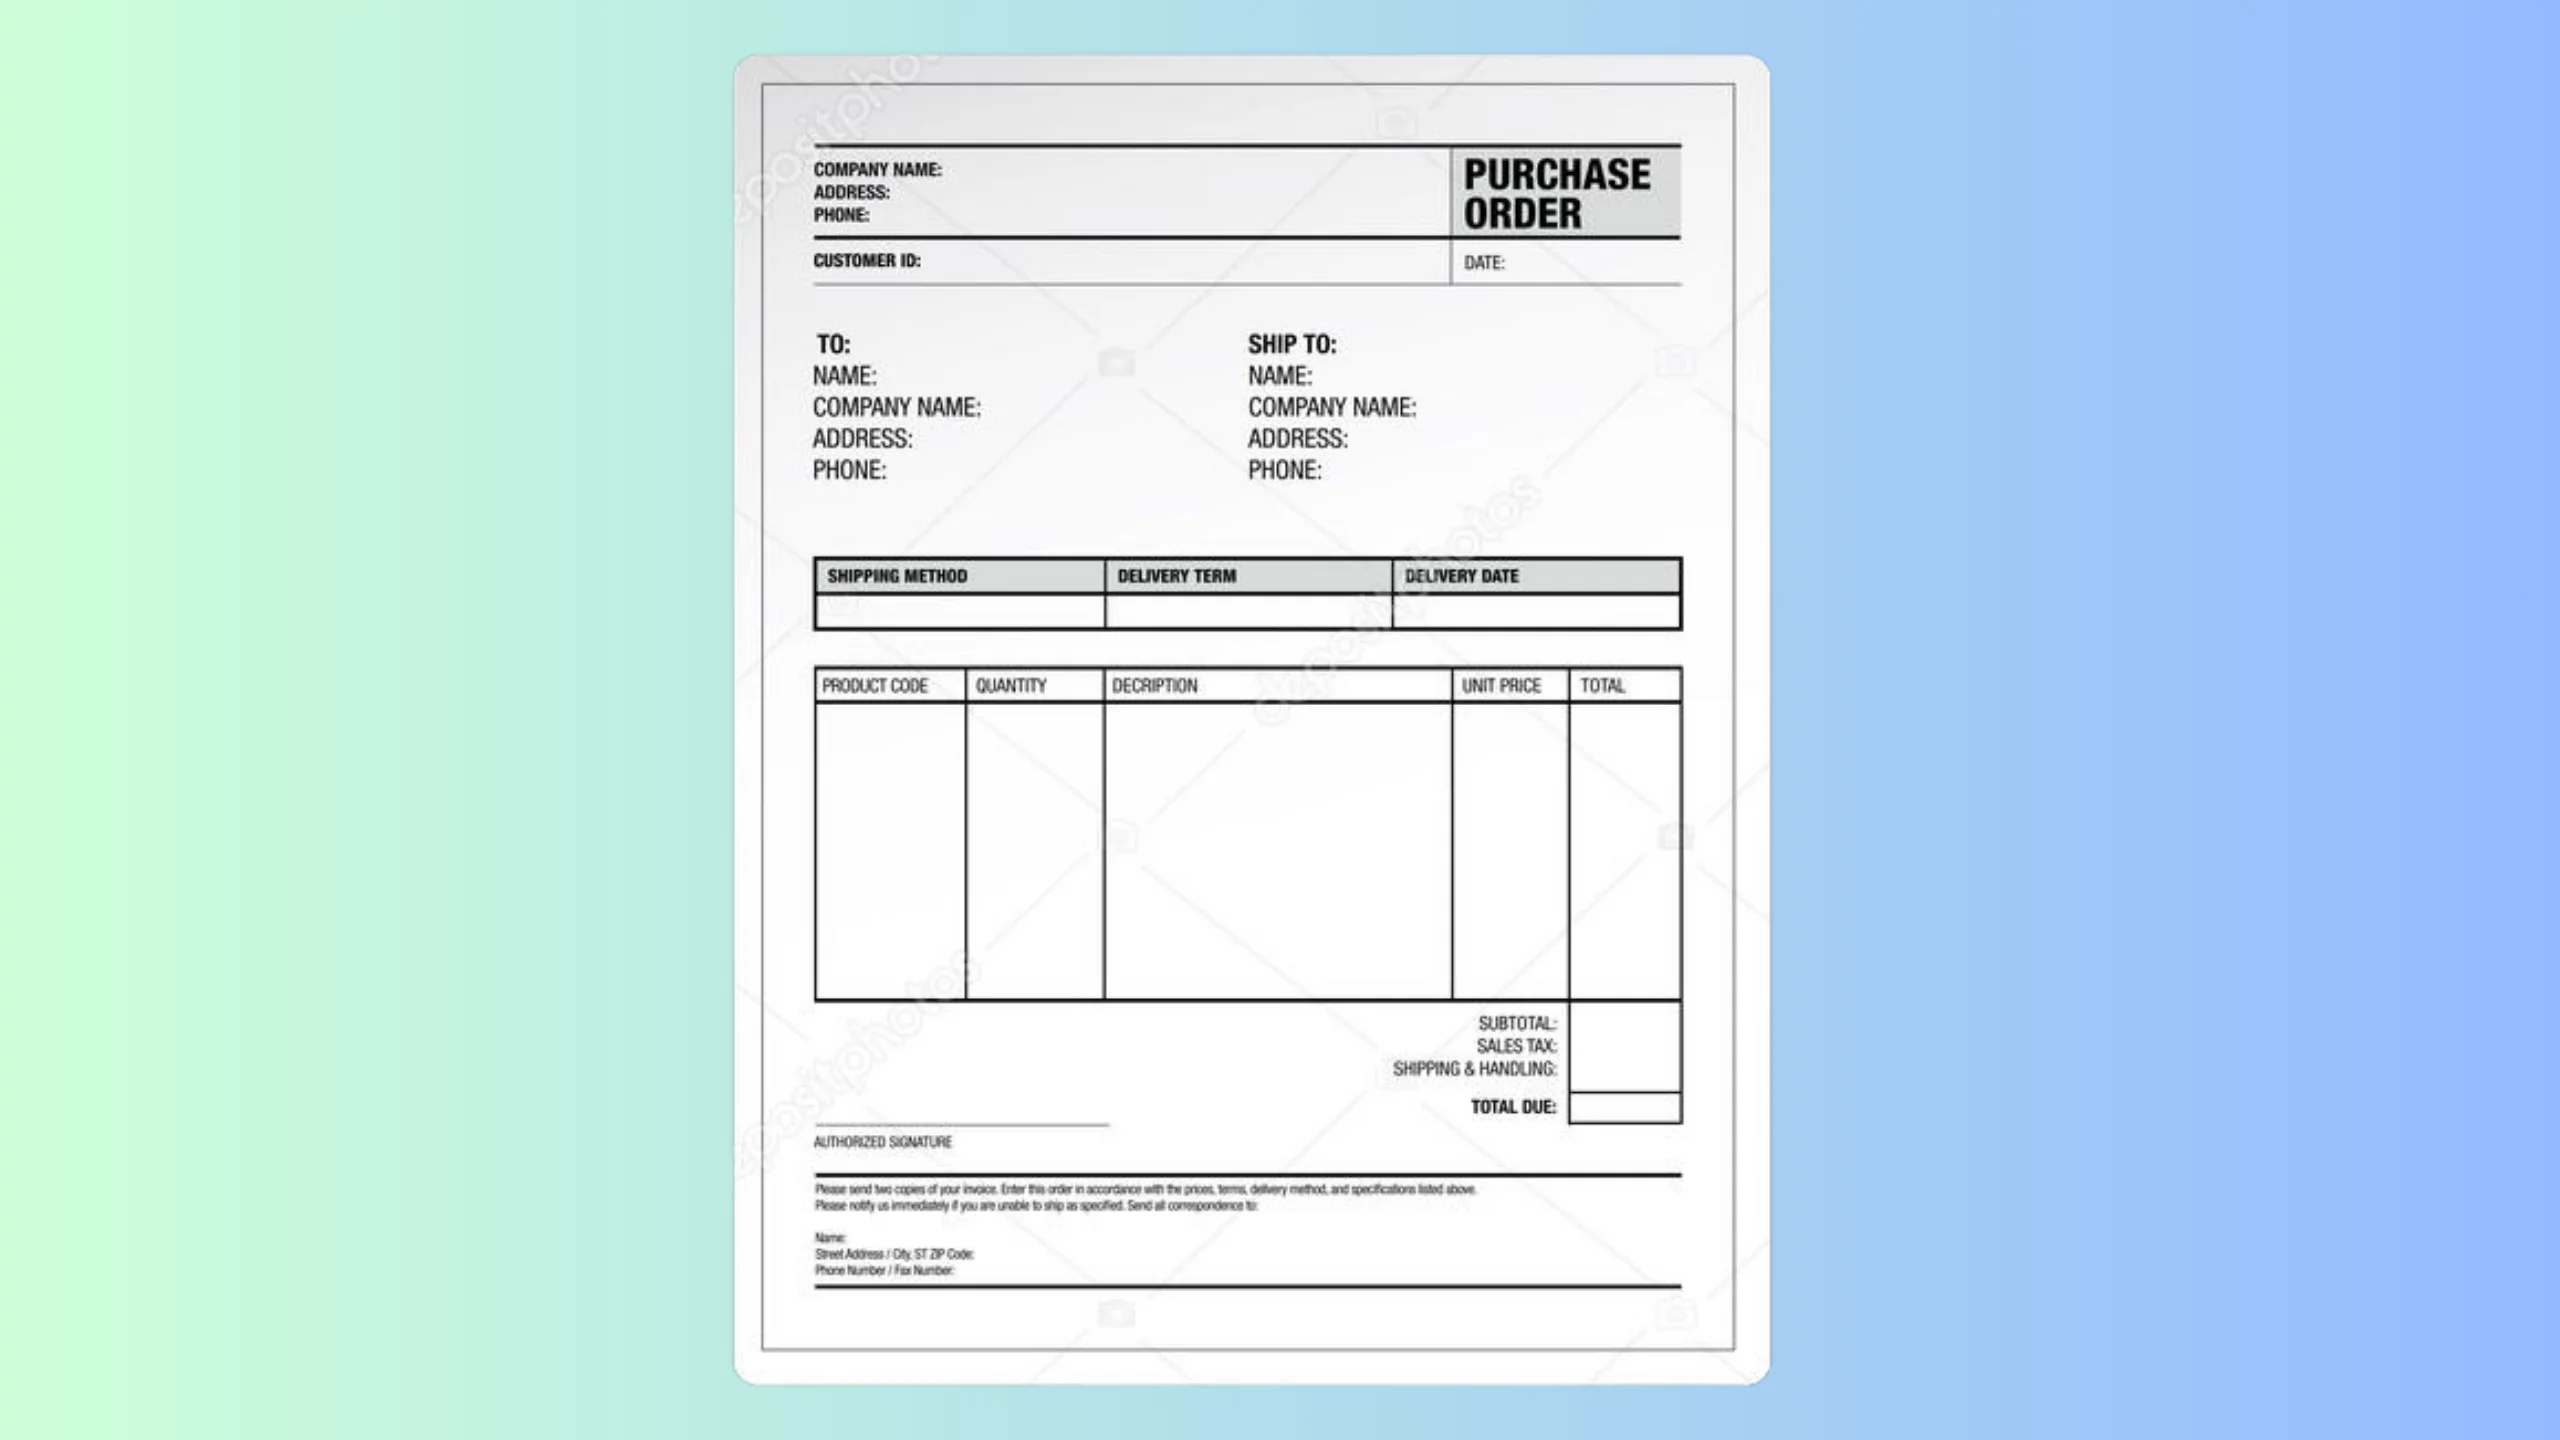 A purchase order template is a pre-designed document that outlines the details of a transaction between a buyer and a seller.